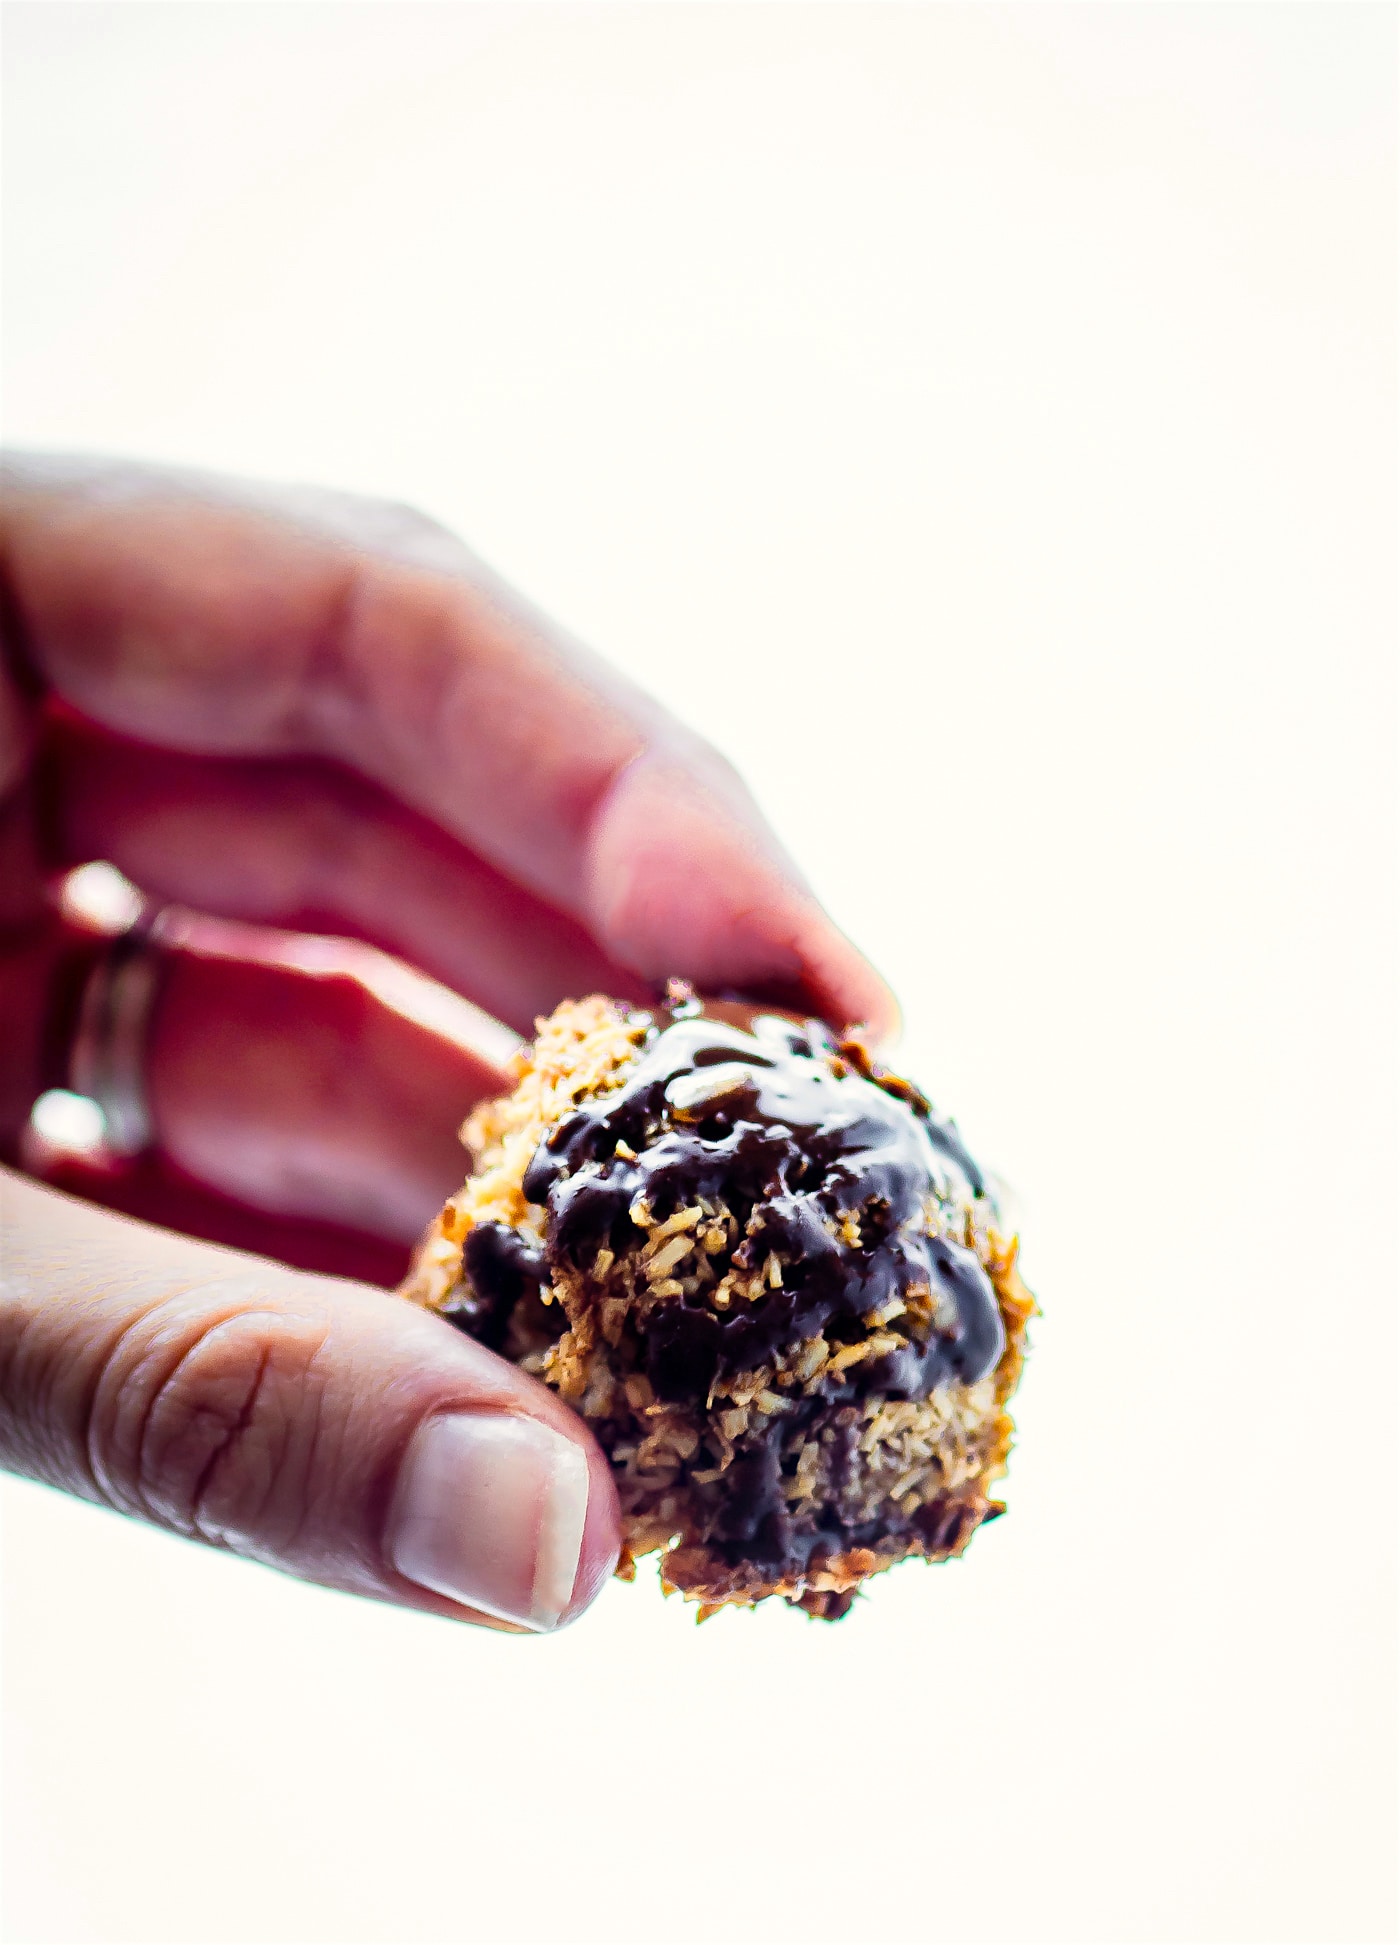 A coconut macaroon with dark chocolate drizzle being held up to show thick texture and hardened chocolate drizzle.